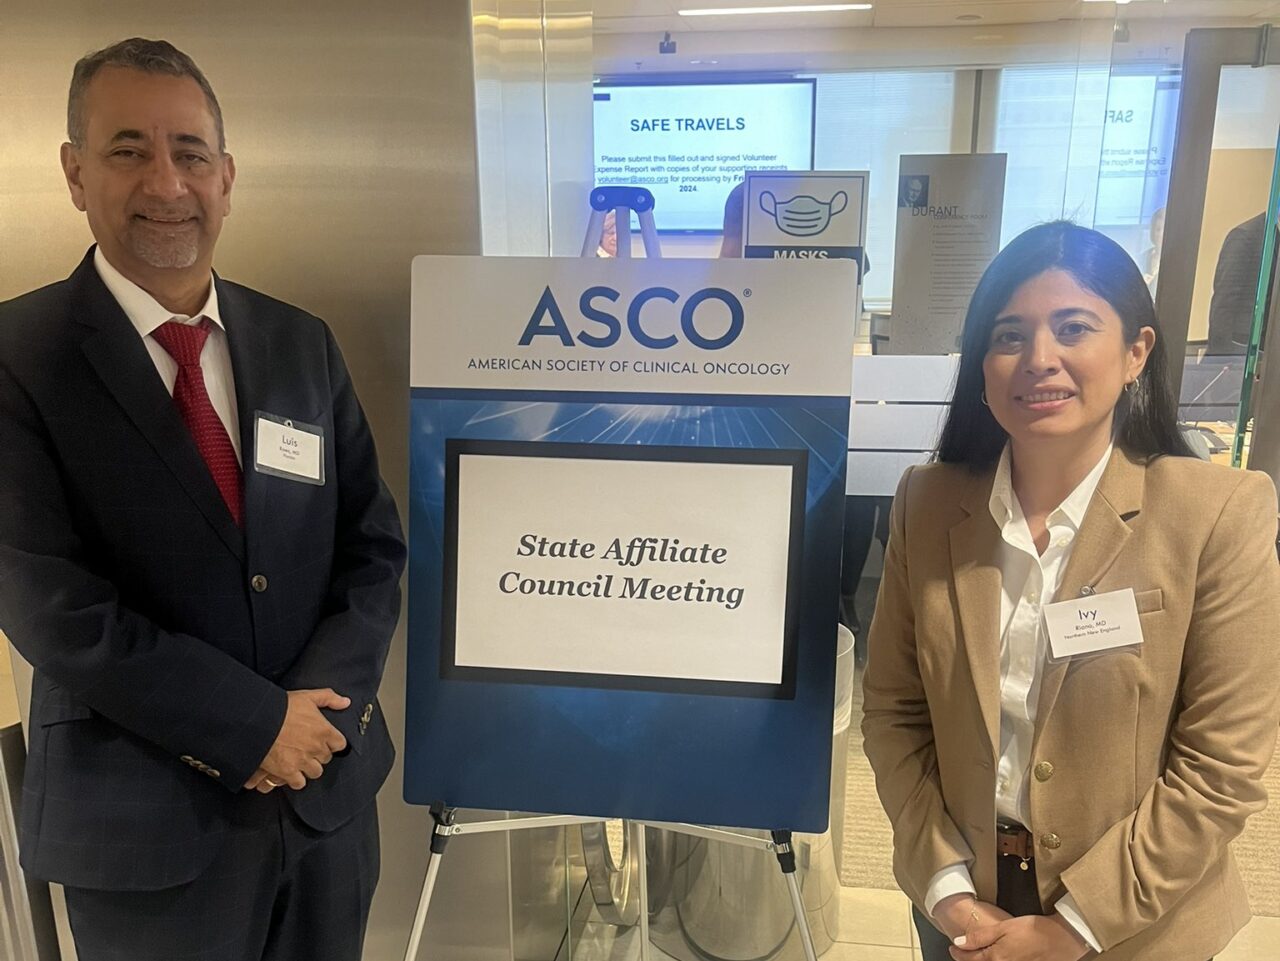 Ivy Riano: We are having our ASCO State Affiliate Council meeting